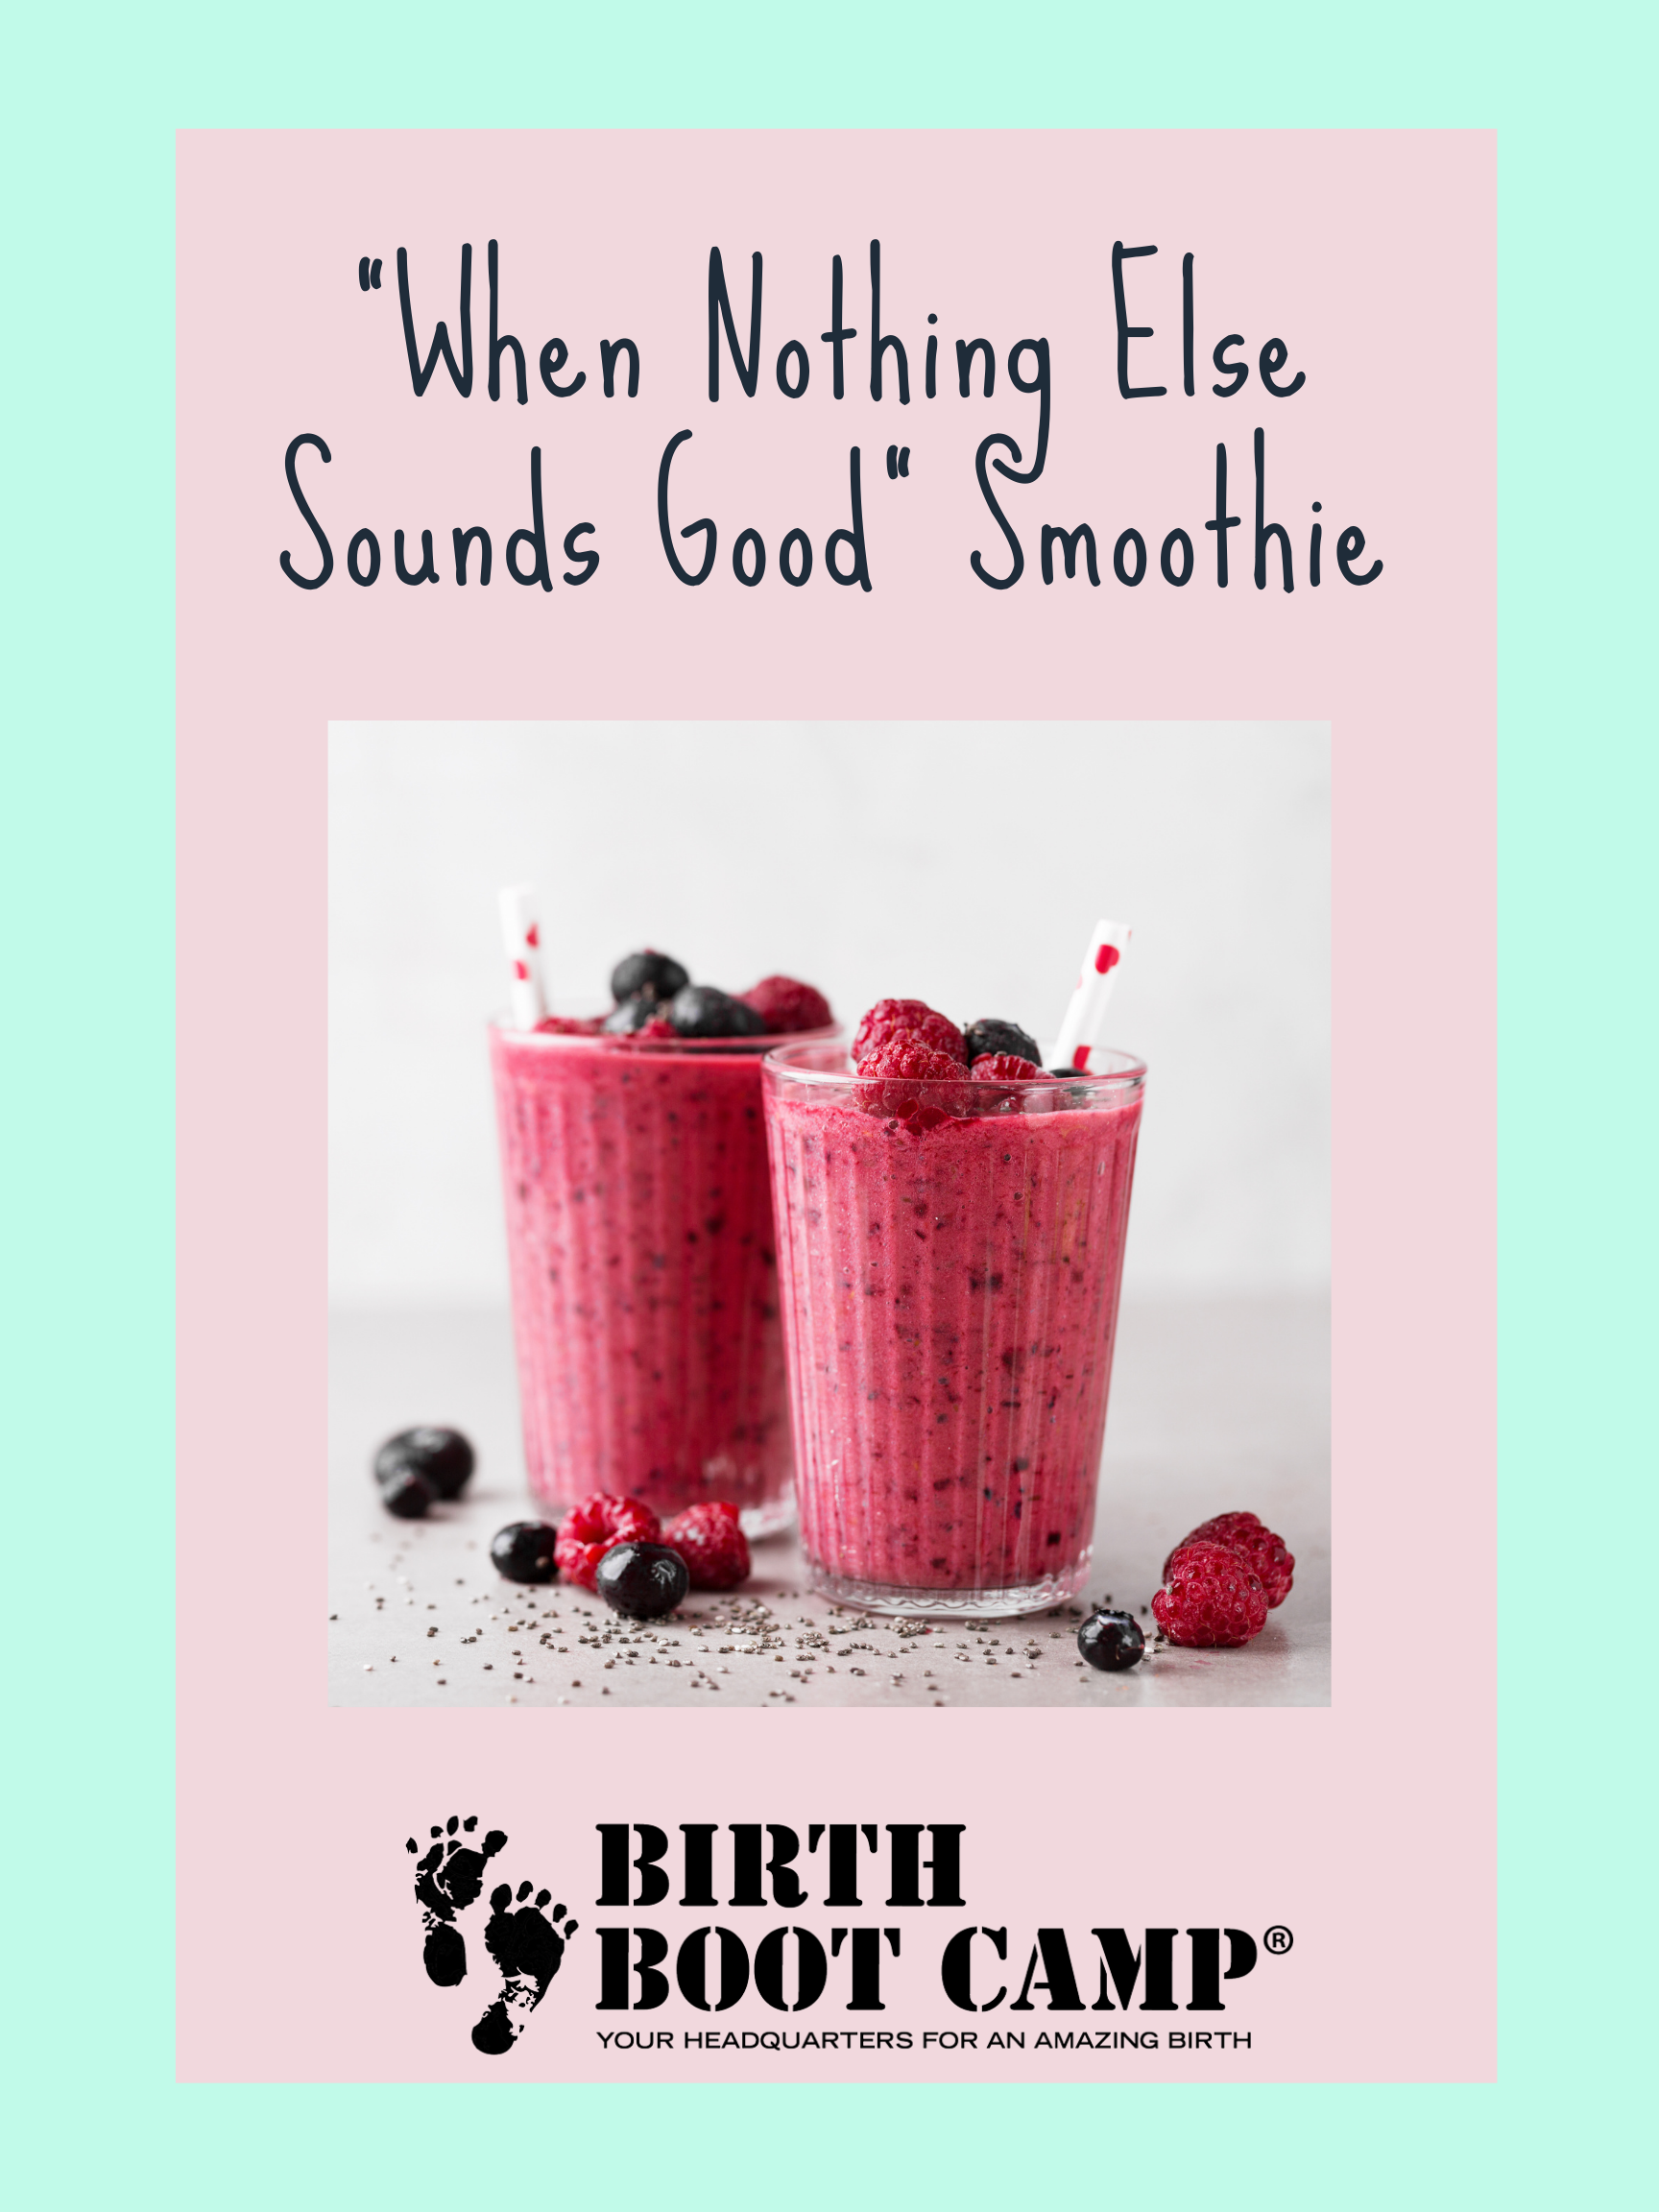 What to Eat Wednesday – “When Nothing Else Sounds Good” Smoothie